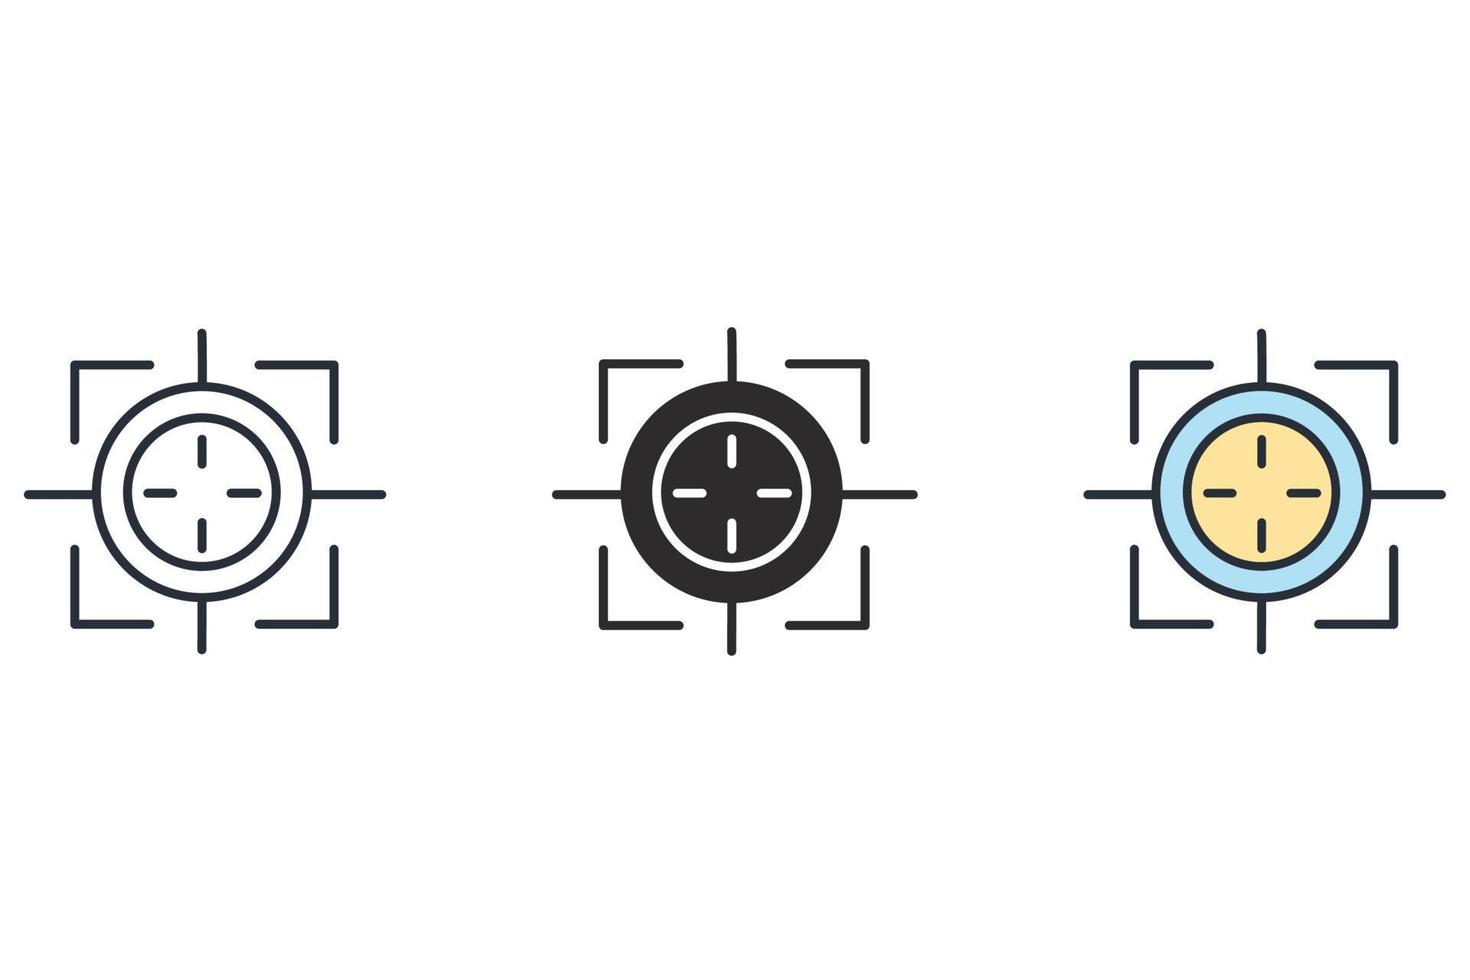 geolocation icons  symbol vector elements for infographic web